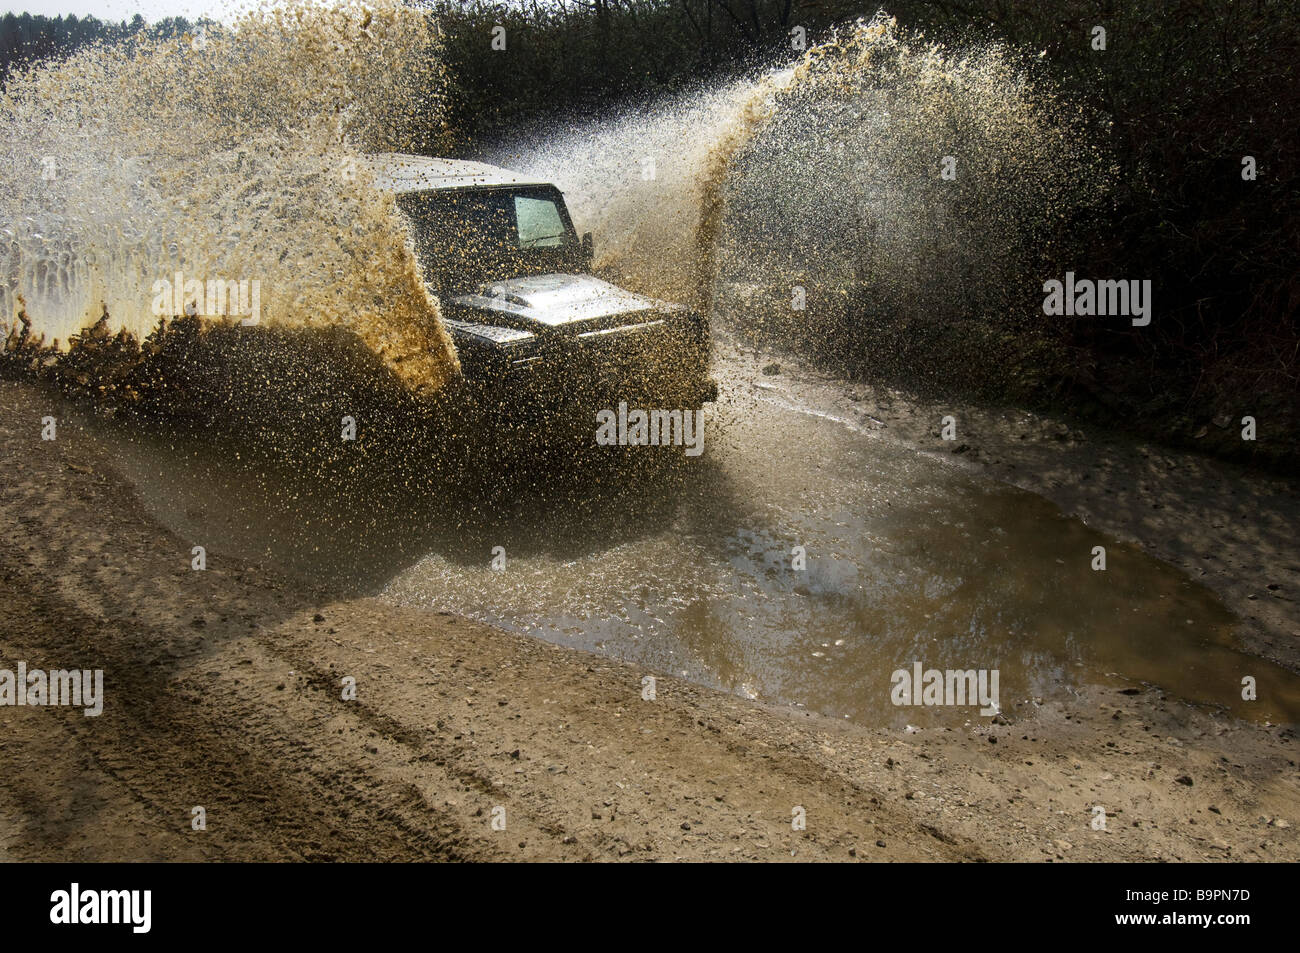 A Land Rover Defender 90 on an offroad trail Stock Photo